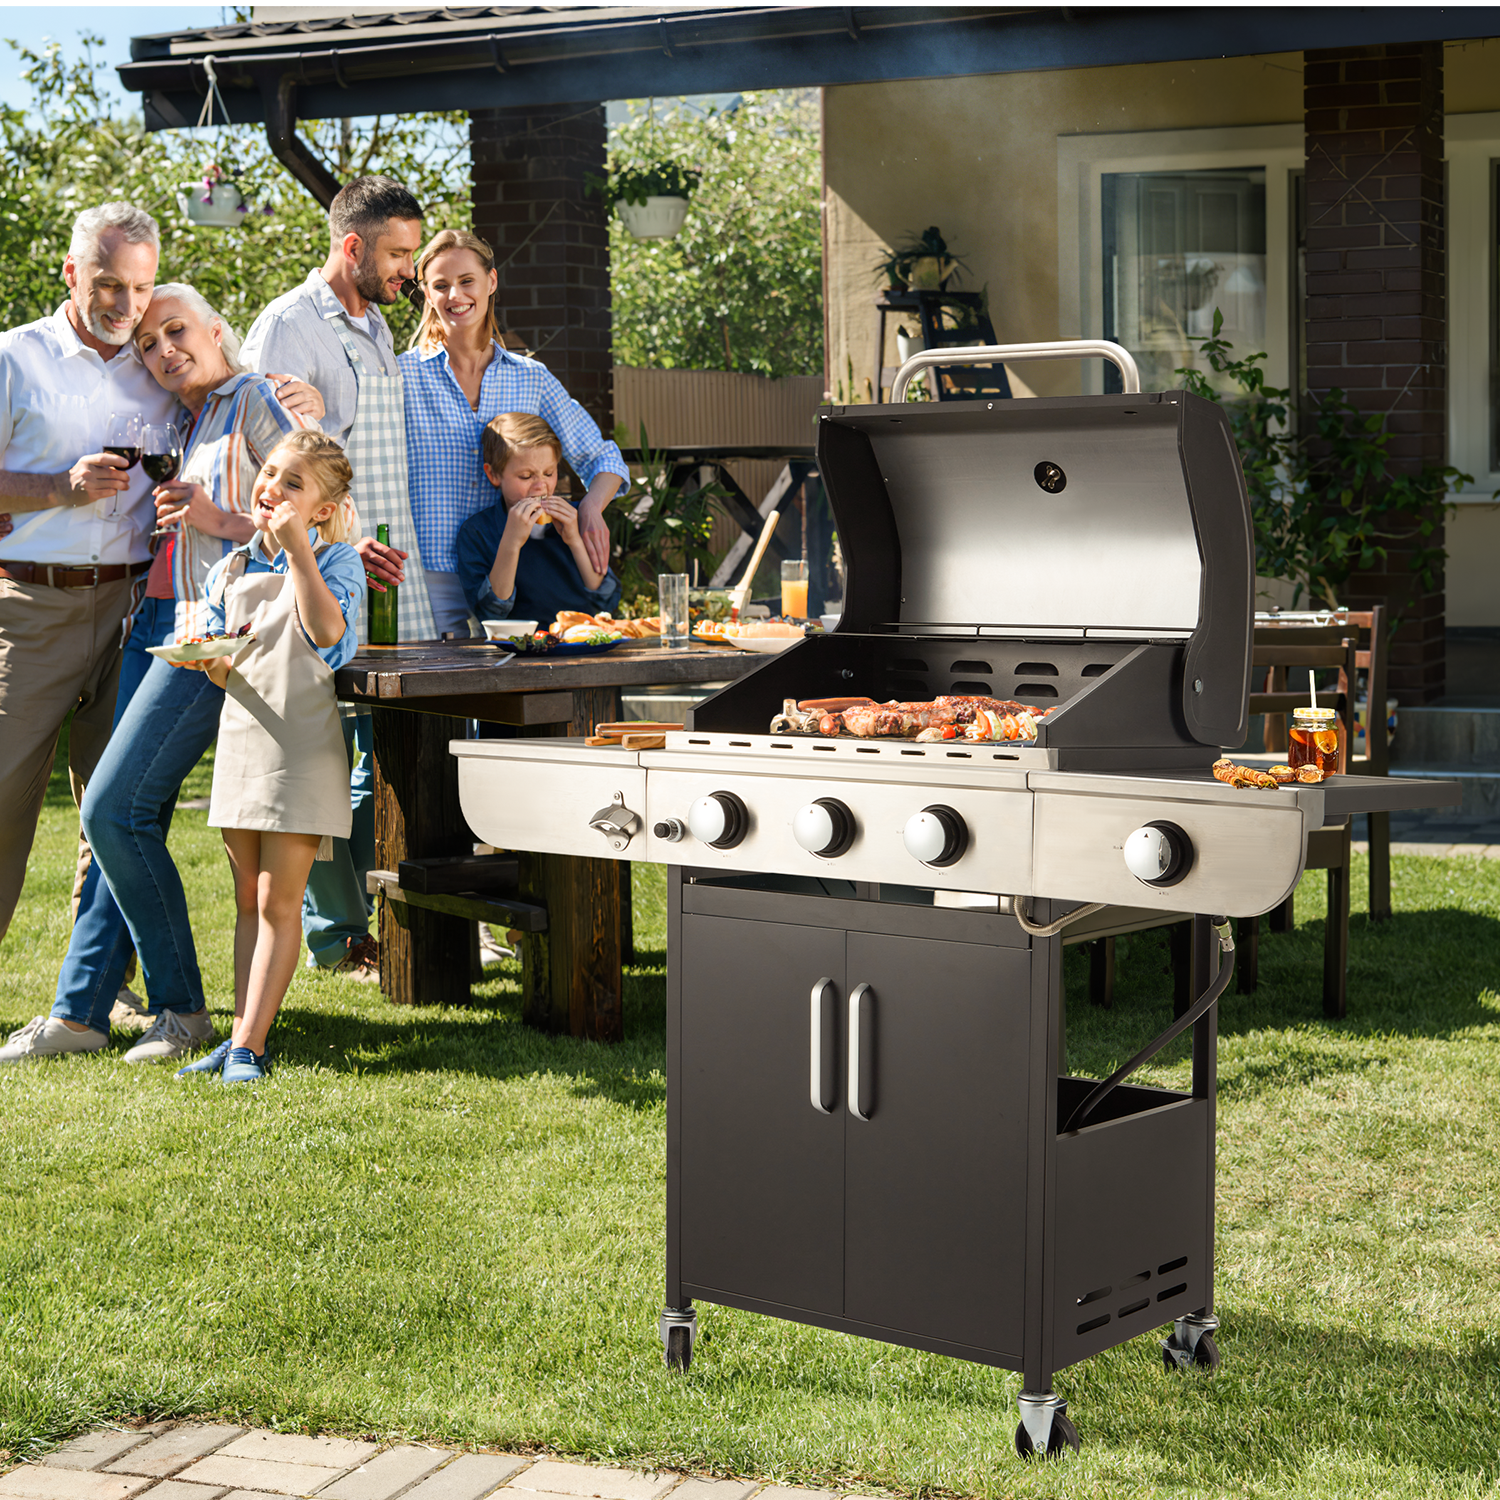 Yoleny 3 Burner BBQ Propane Gas Grill BTU Stainless Steel with Stove and Side Table